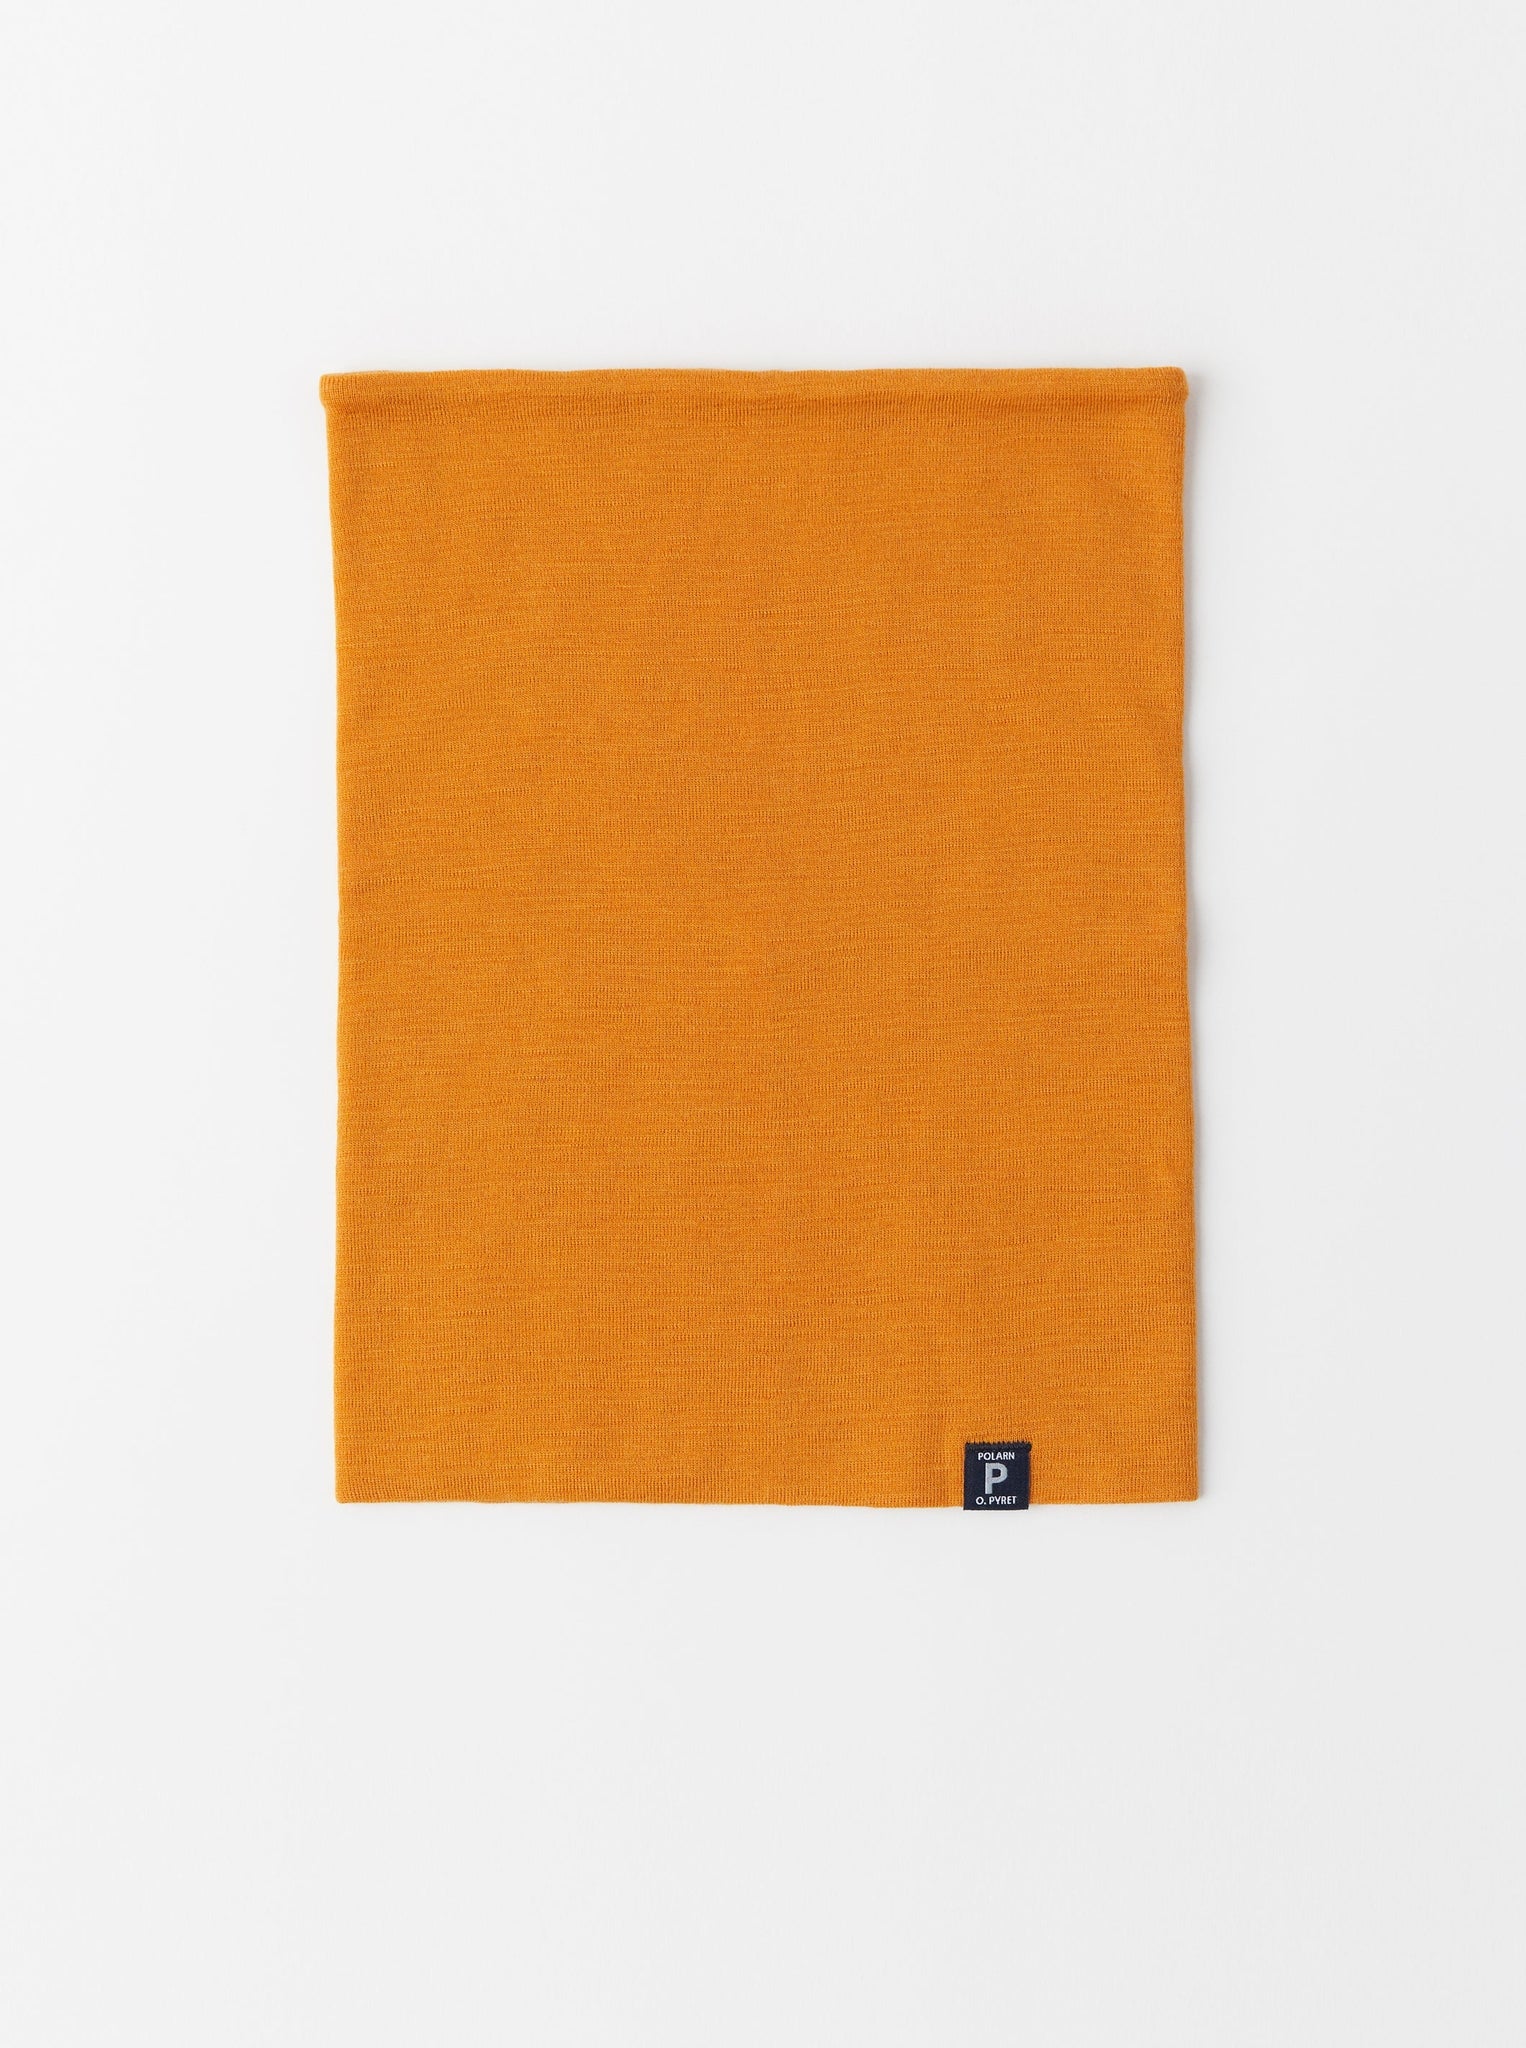 Merino Wool Yellow Kids Snood from the Polarn O. Pyret kidswear collection. Quality kids clothing made to last.